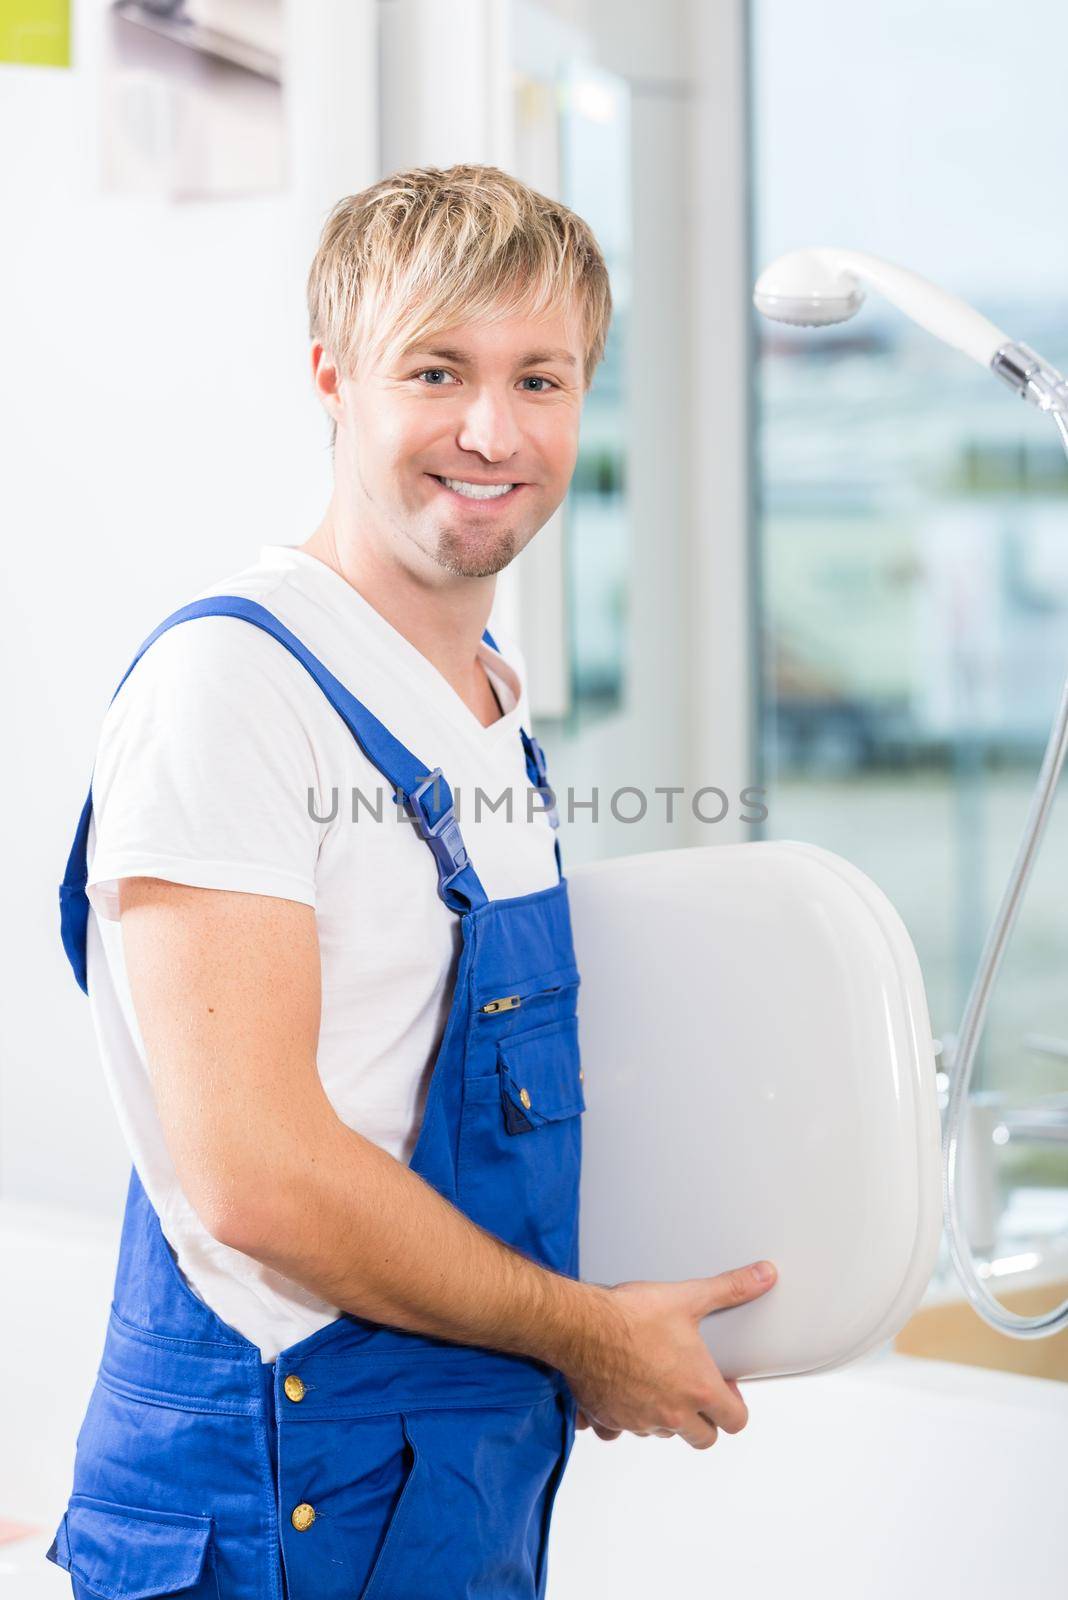 Portrait of a cheerful man wearing blue overall while working in a sanitary ware shop with modern fixtures and accessories for sale